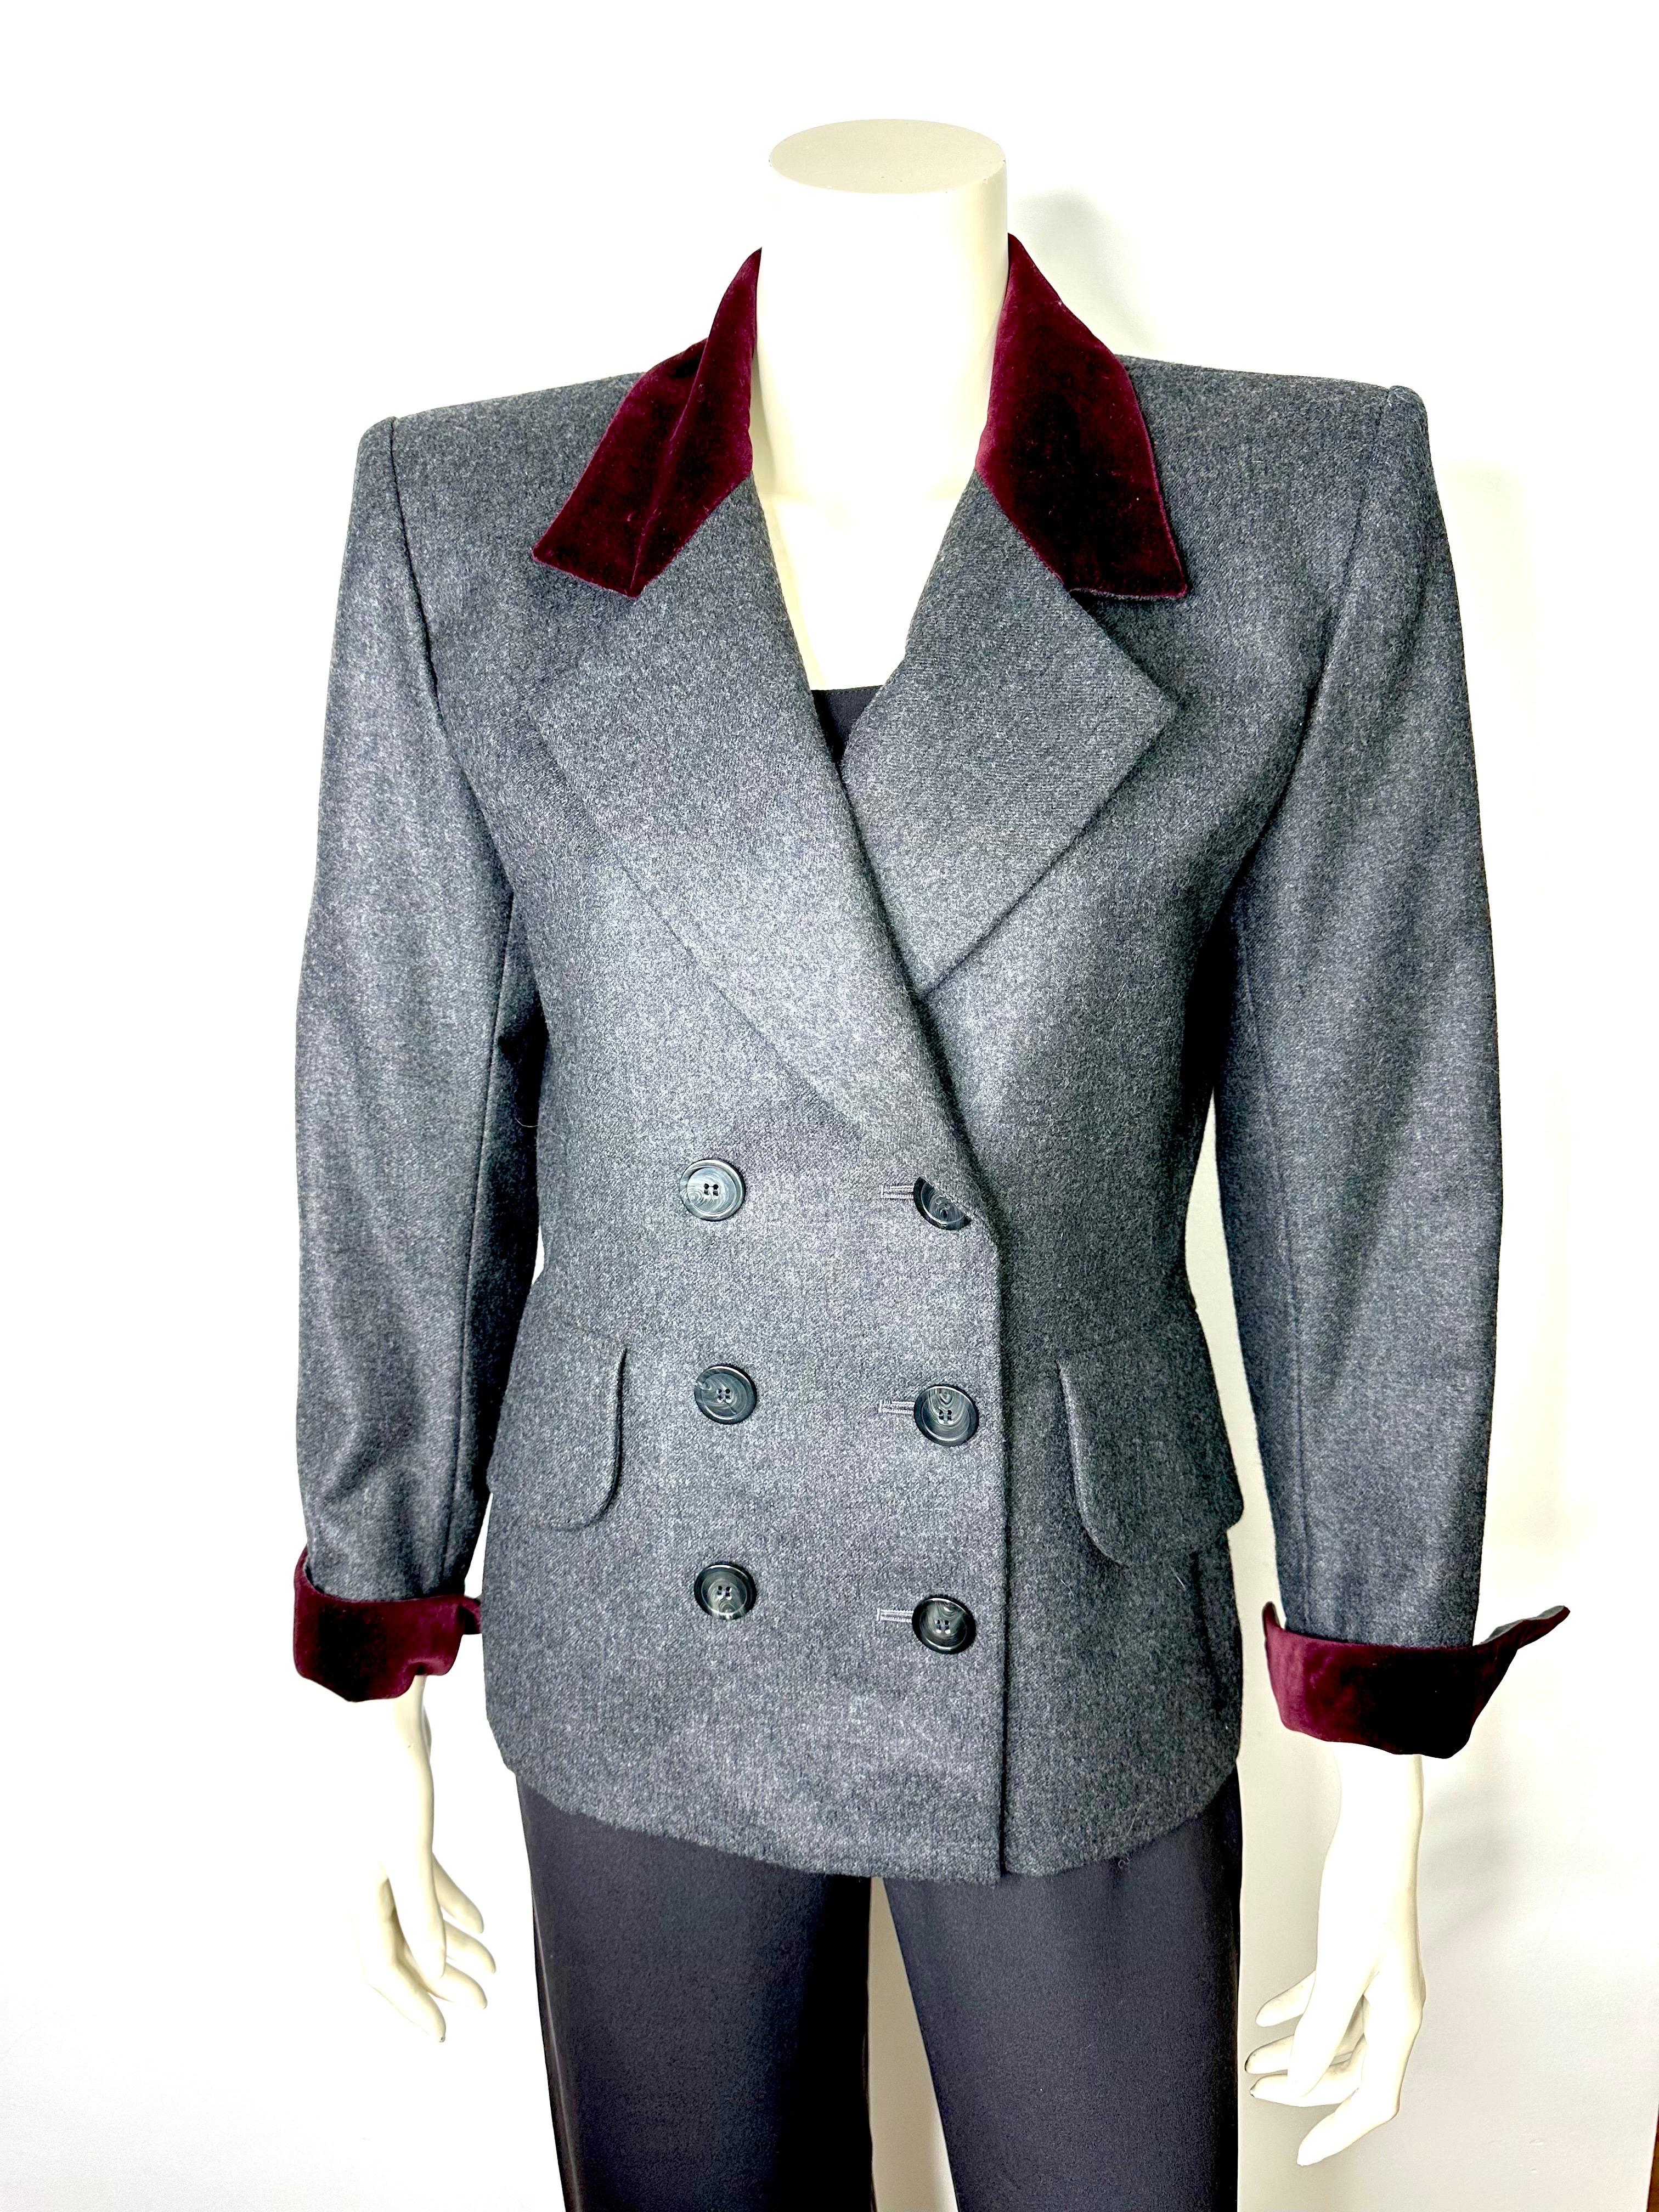 Vintage Yves saint Laurent variation blazer from 1990, slim-fit, gray wool with burgundy velvet collar and cuffs.
The blazer features double-breasted buttoning and large flap pockets.
Size 40, please refer to measurements
Shoulder width 41cm
Chest